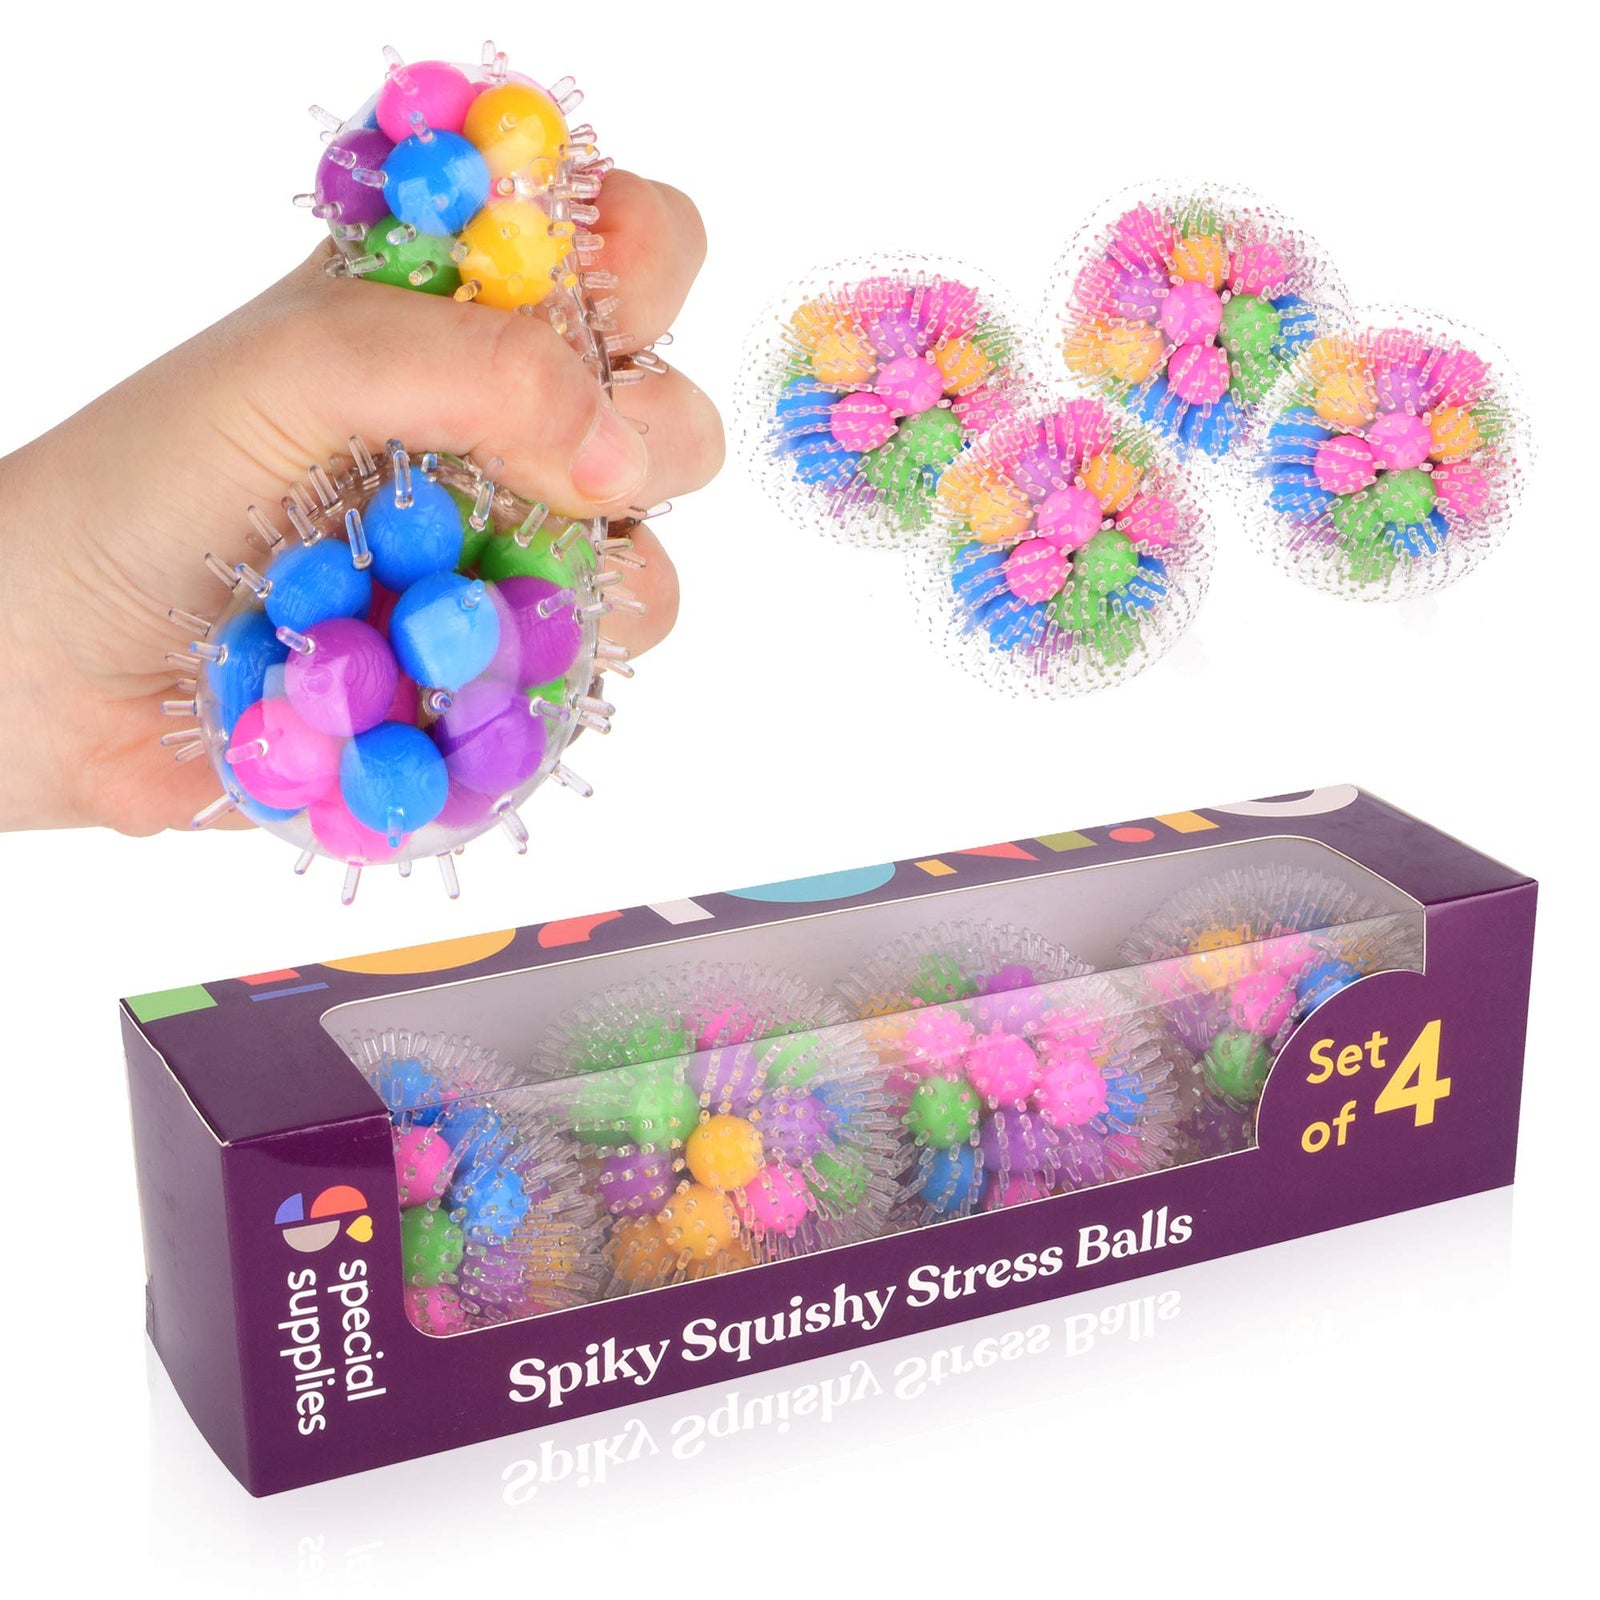 DNA Squish Stress Balls (4-Pack) Squeeze, Color Sensory Toy - Relieve Tension, Stress - Home, Travel and Office Use - Fun for Kids and Adults (Squishy)